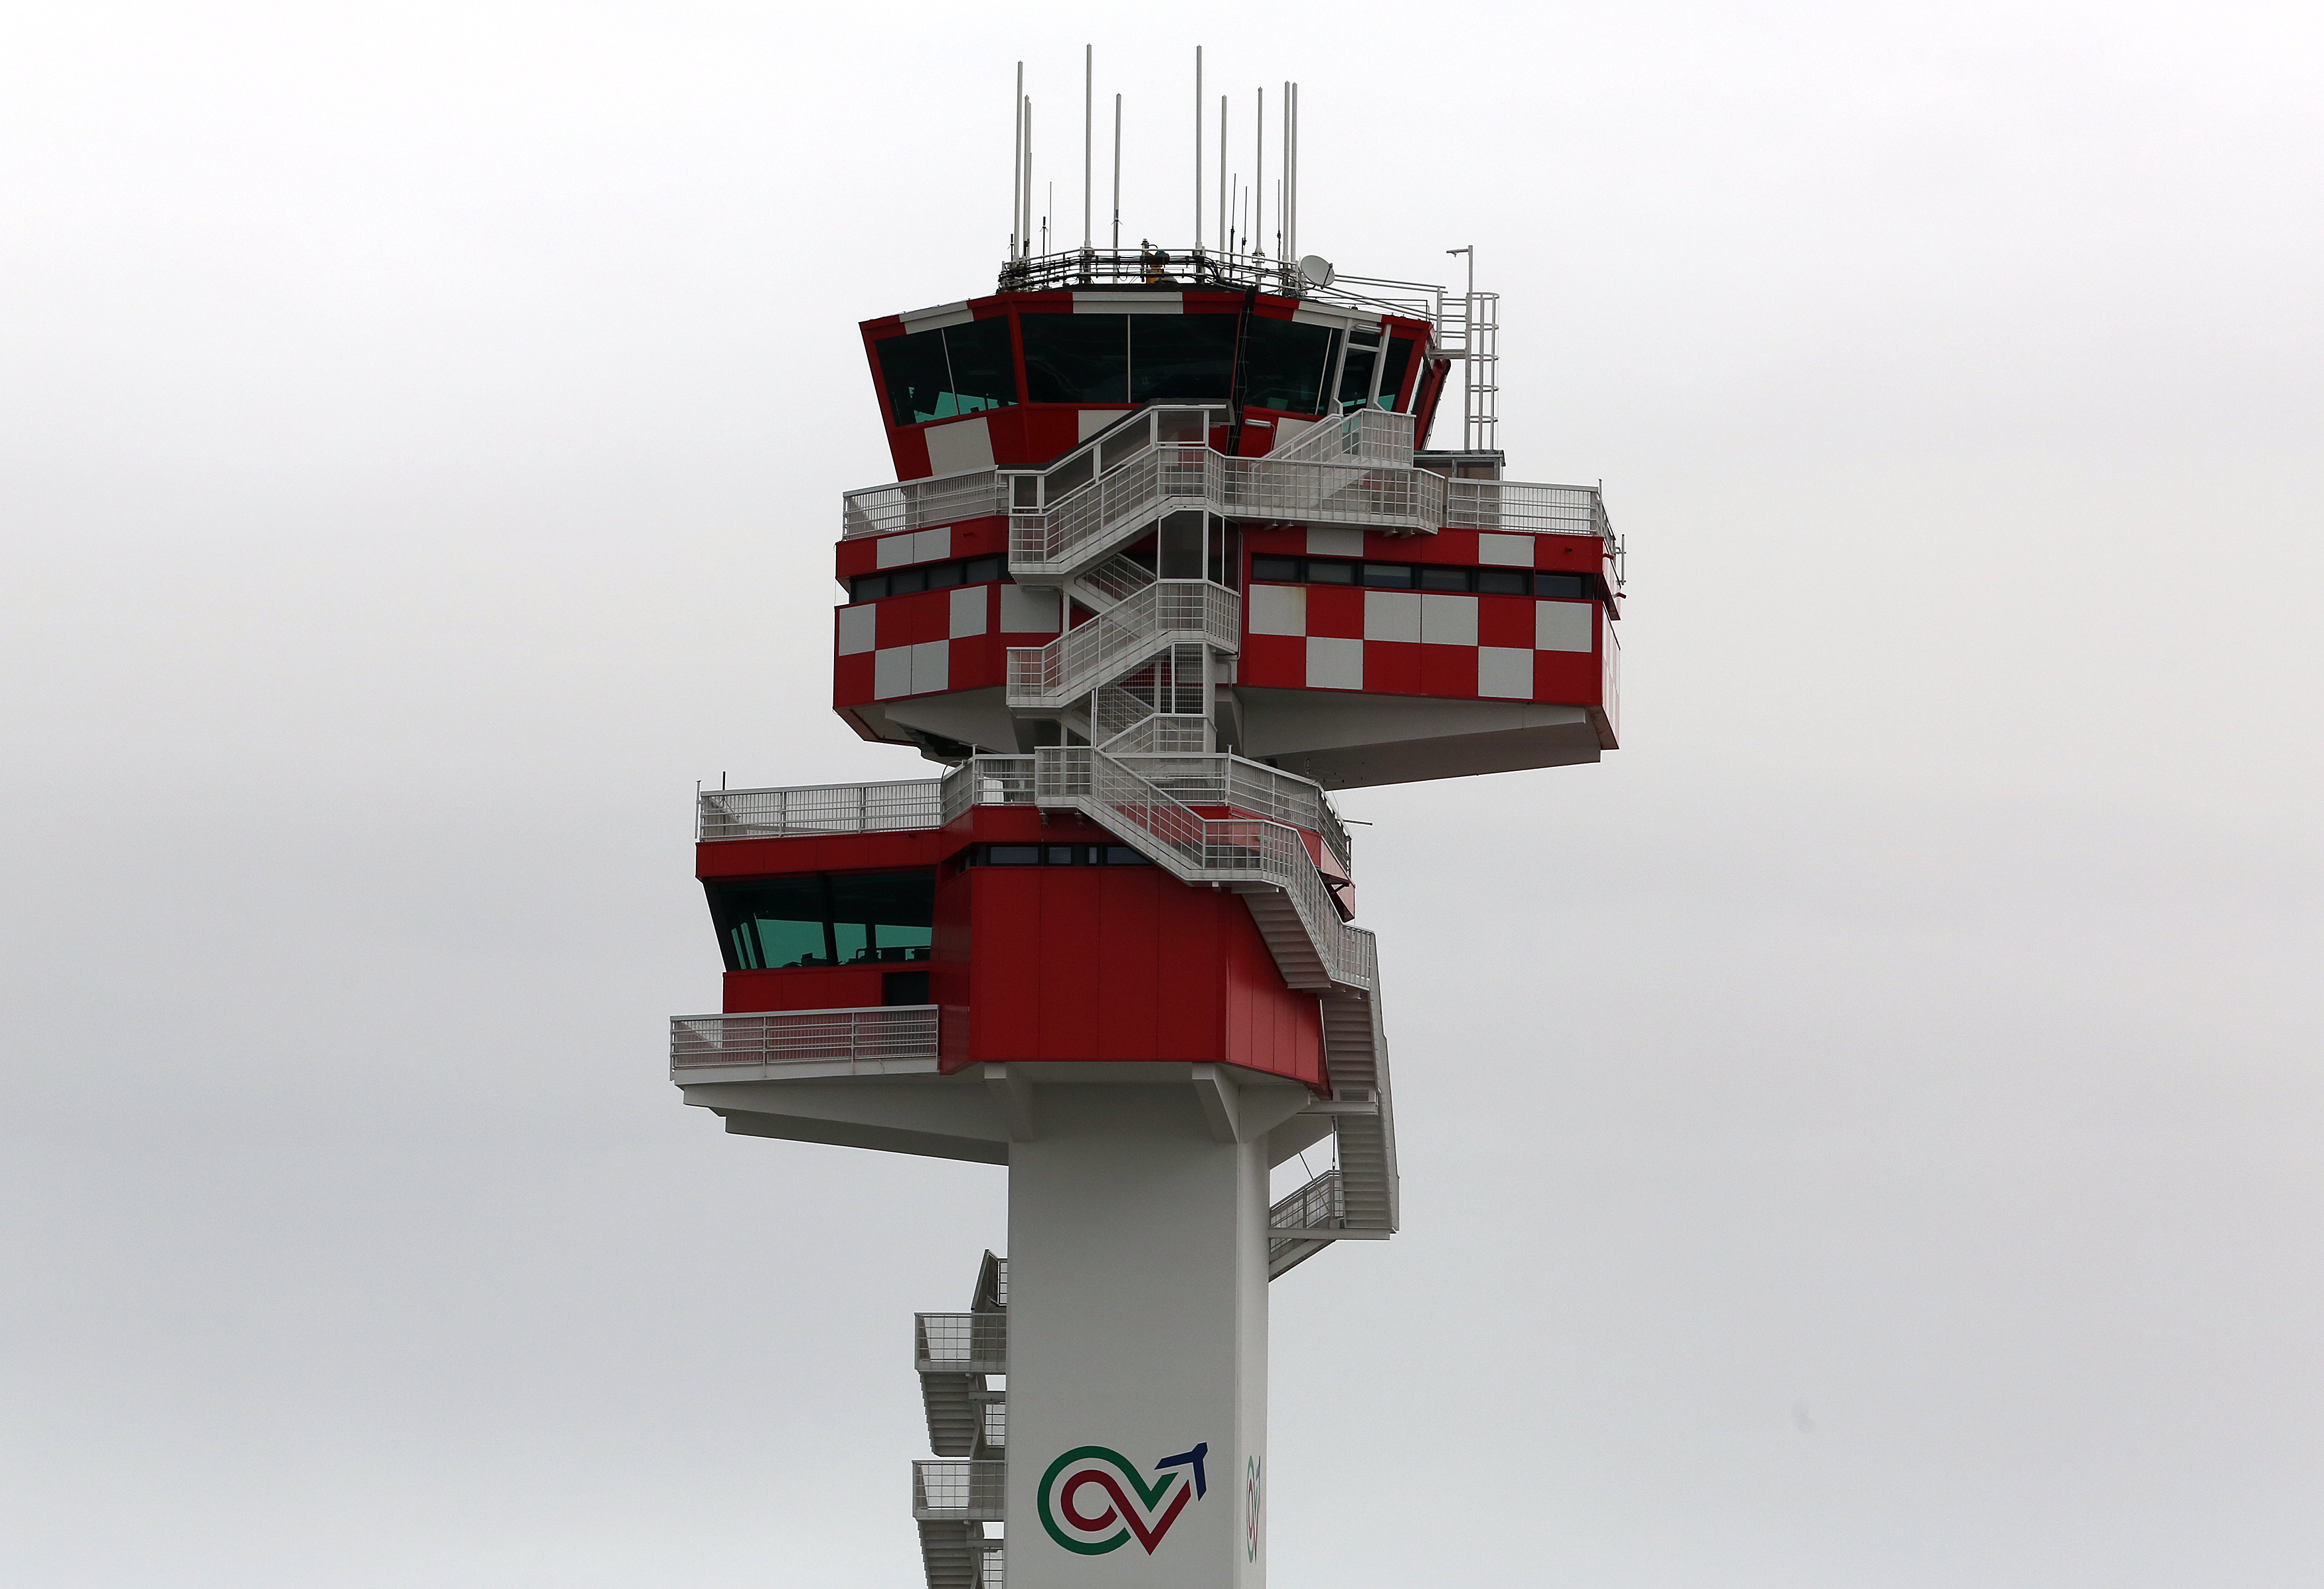 ENAV control tower is seen at the Fiumicino's International airport near Rome